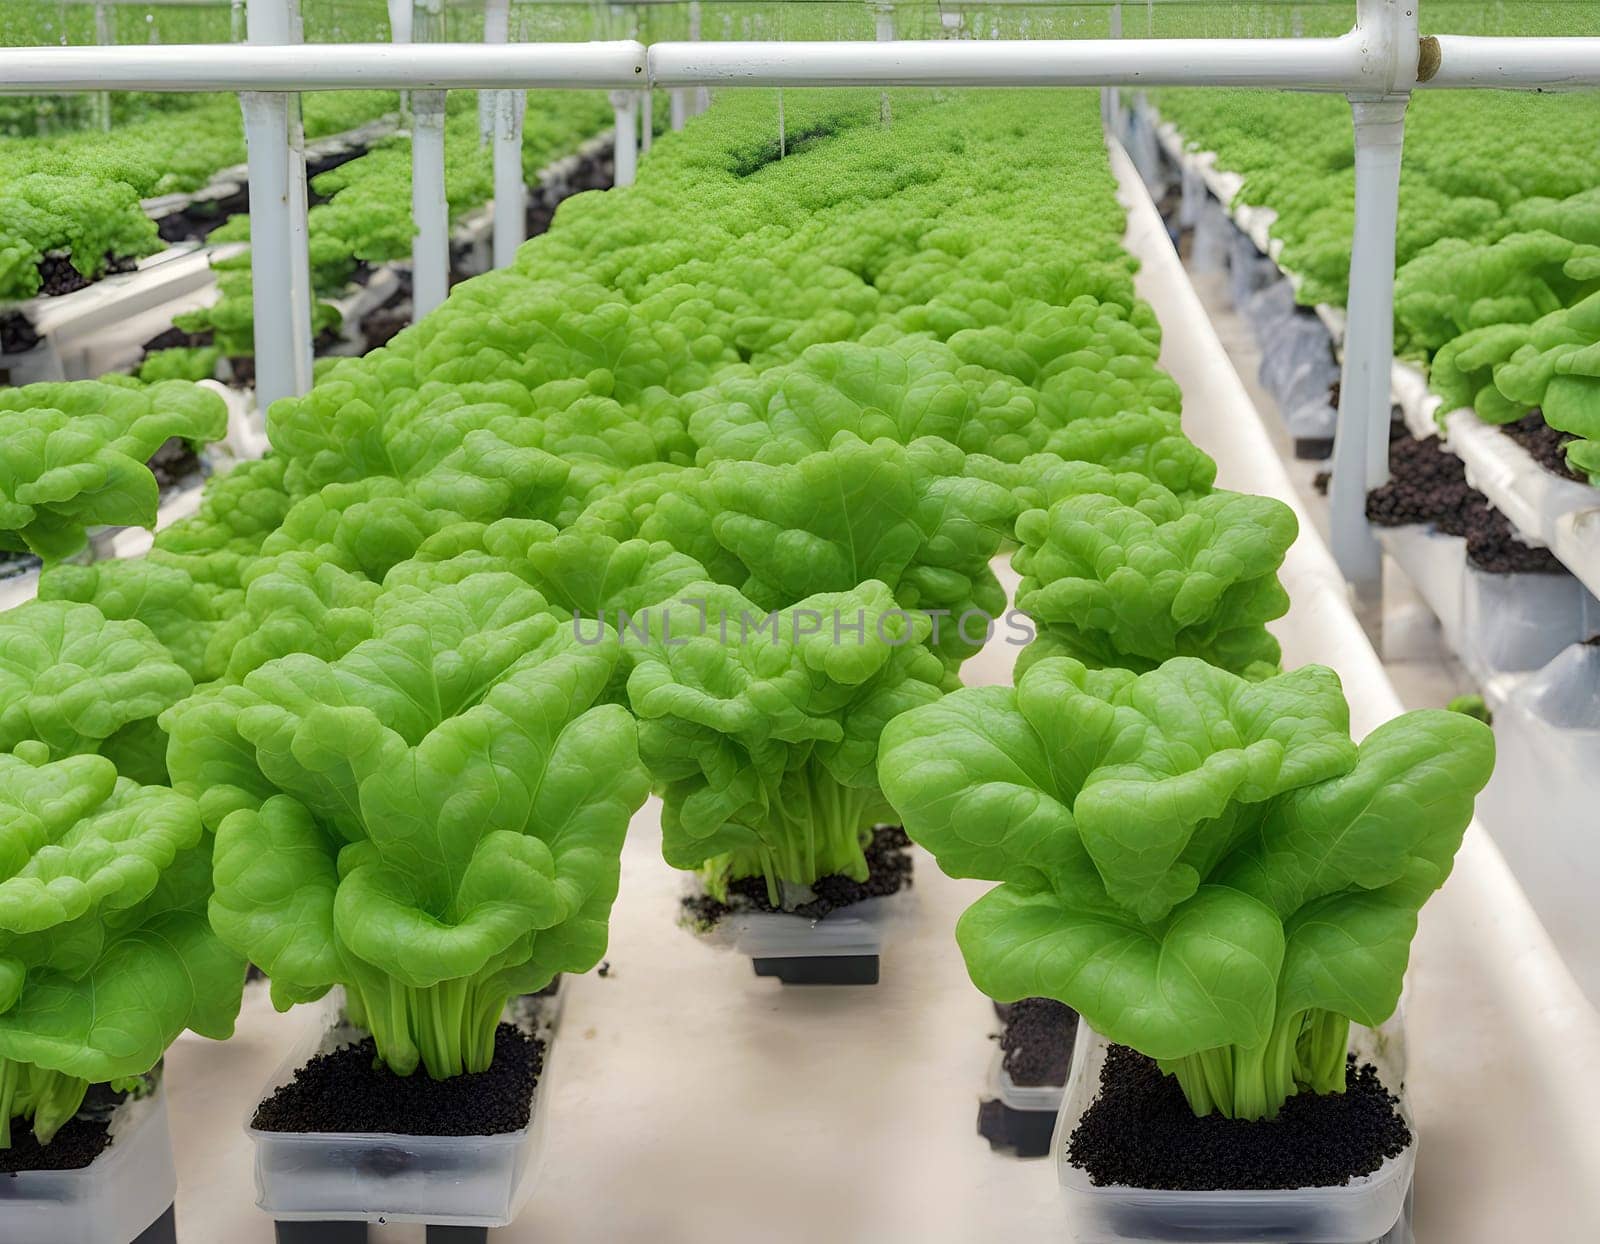 Hydroponic Lettuce Cultivation in a Greenhouse Created by artificial intelligence